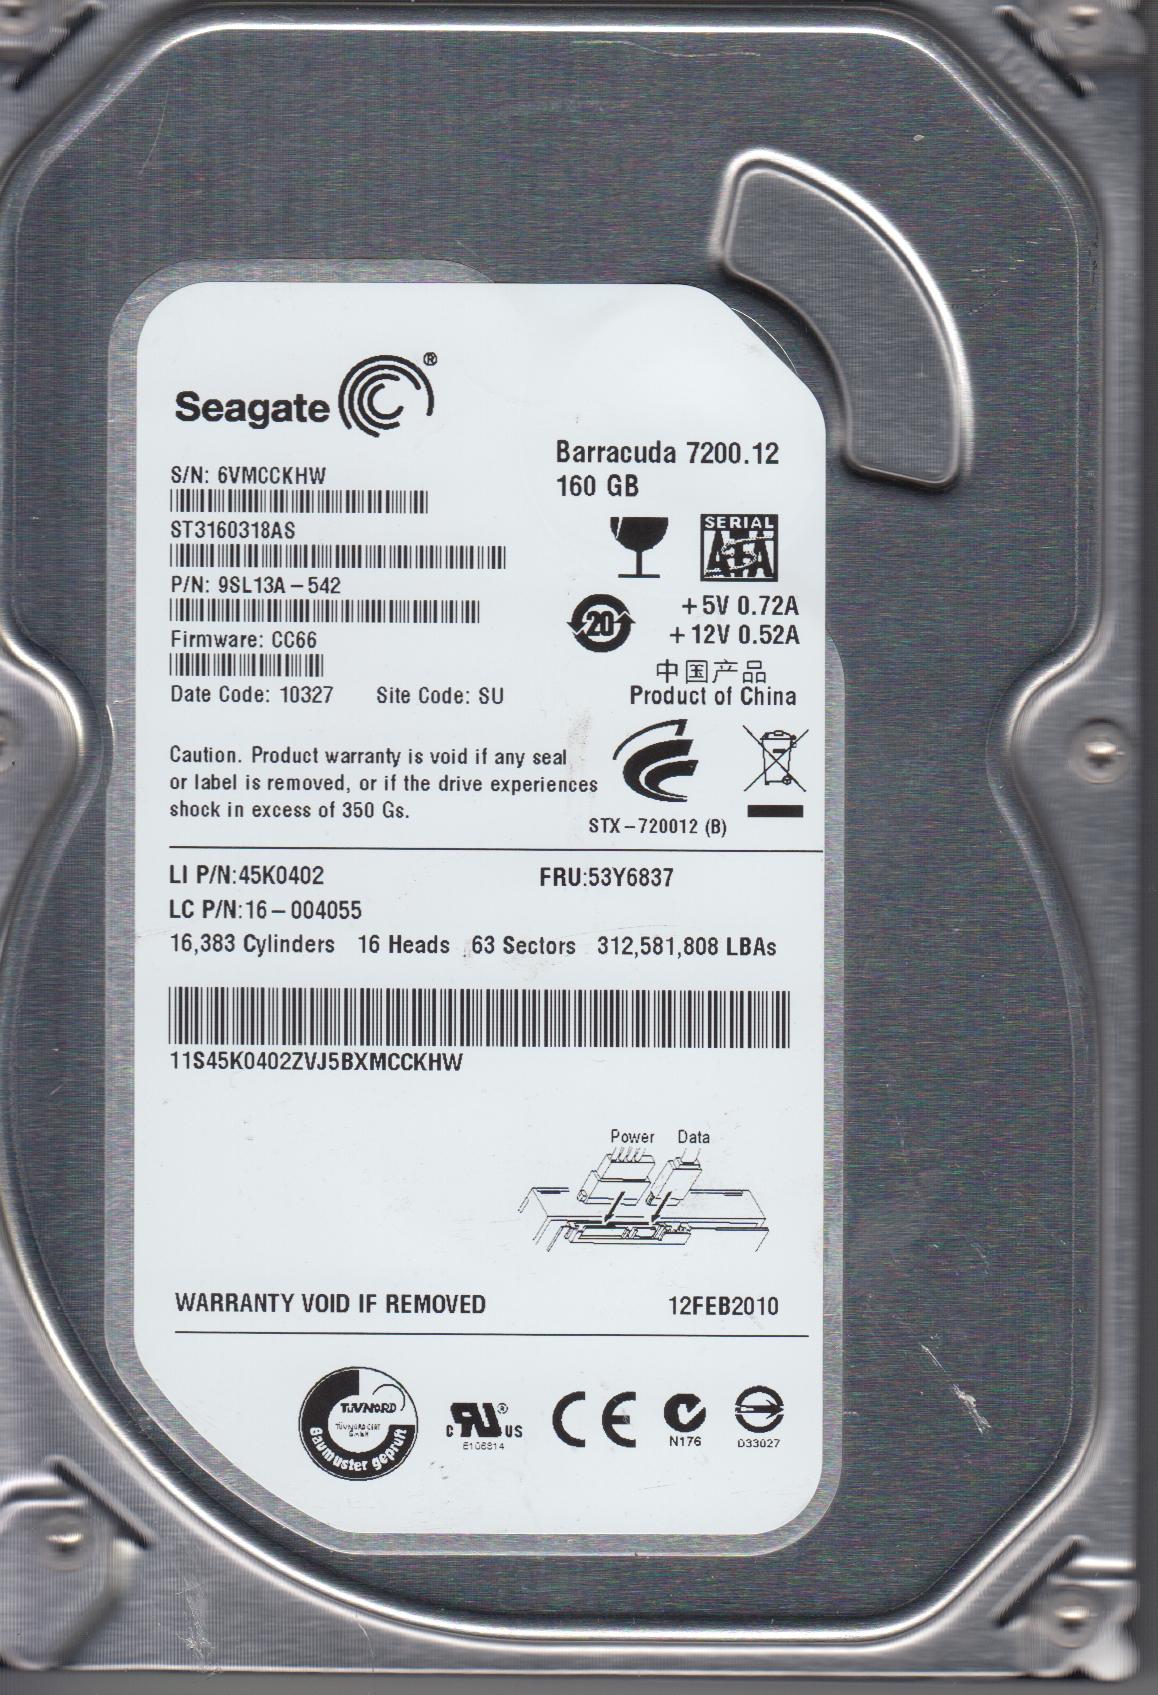 ST3160318AS, 6VM, SU, PN 9SL13A-542, FW CC66, Seagate 160GB SATA 3.5 Hard Drive - image 1 of 2